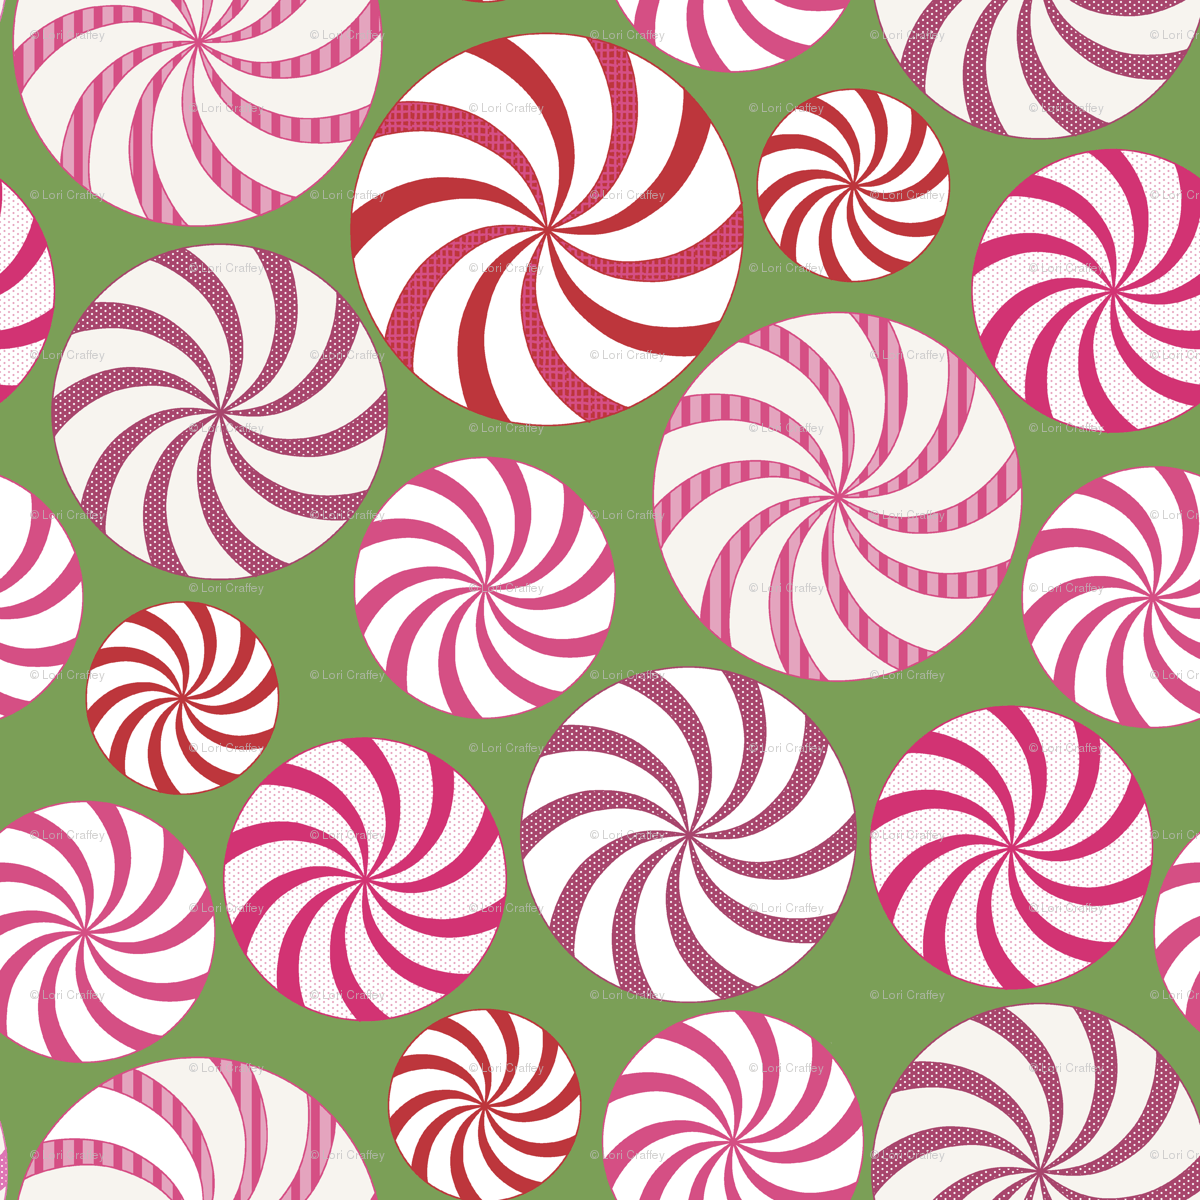 candy cane fabric, wallpaper & gift wrap